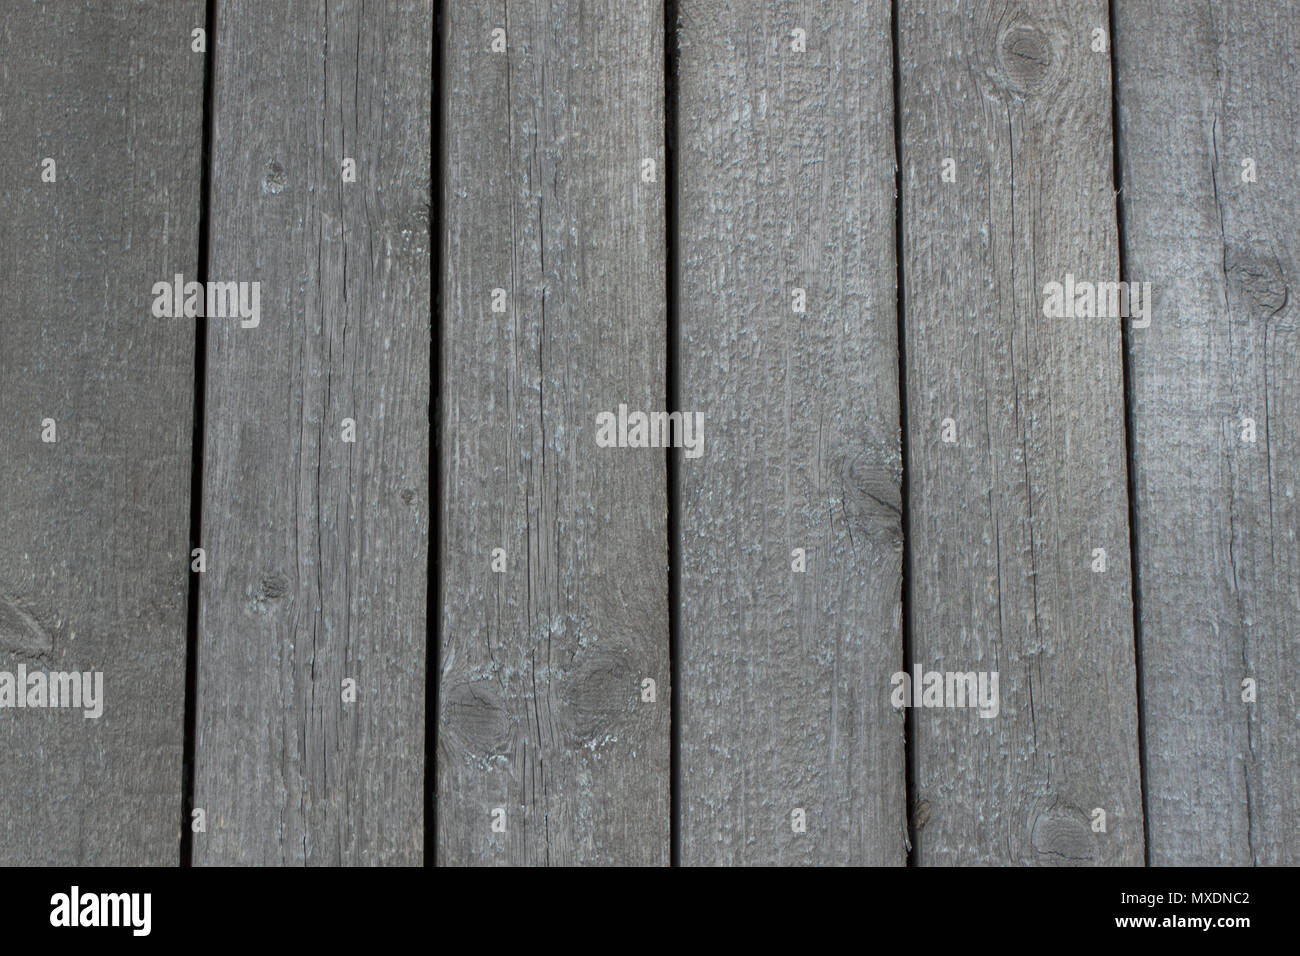 Wall of the old wooden boards Stock Photo